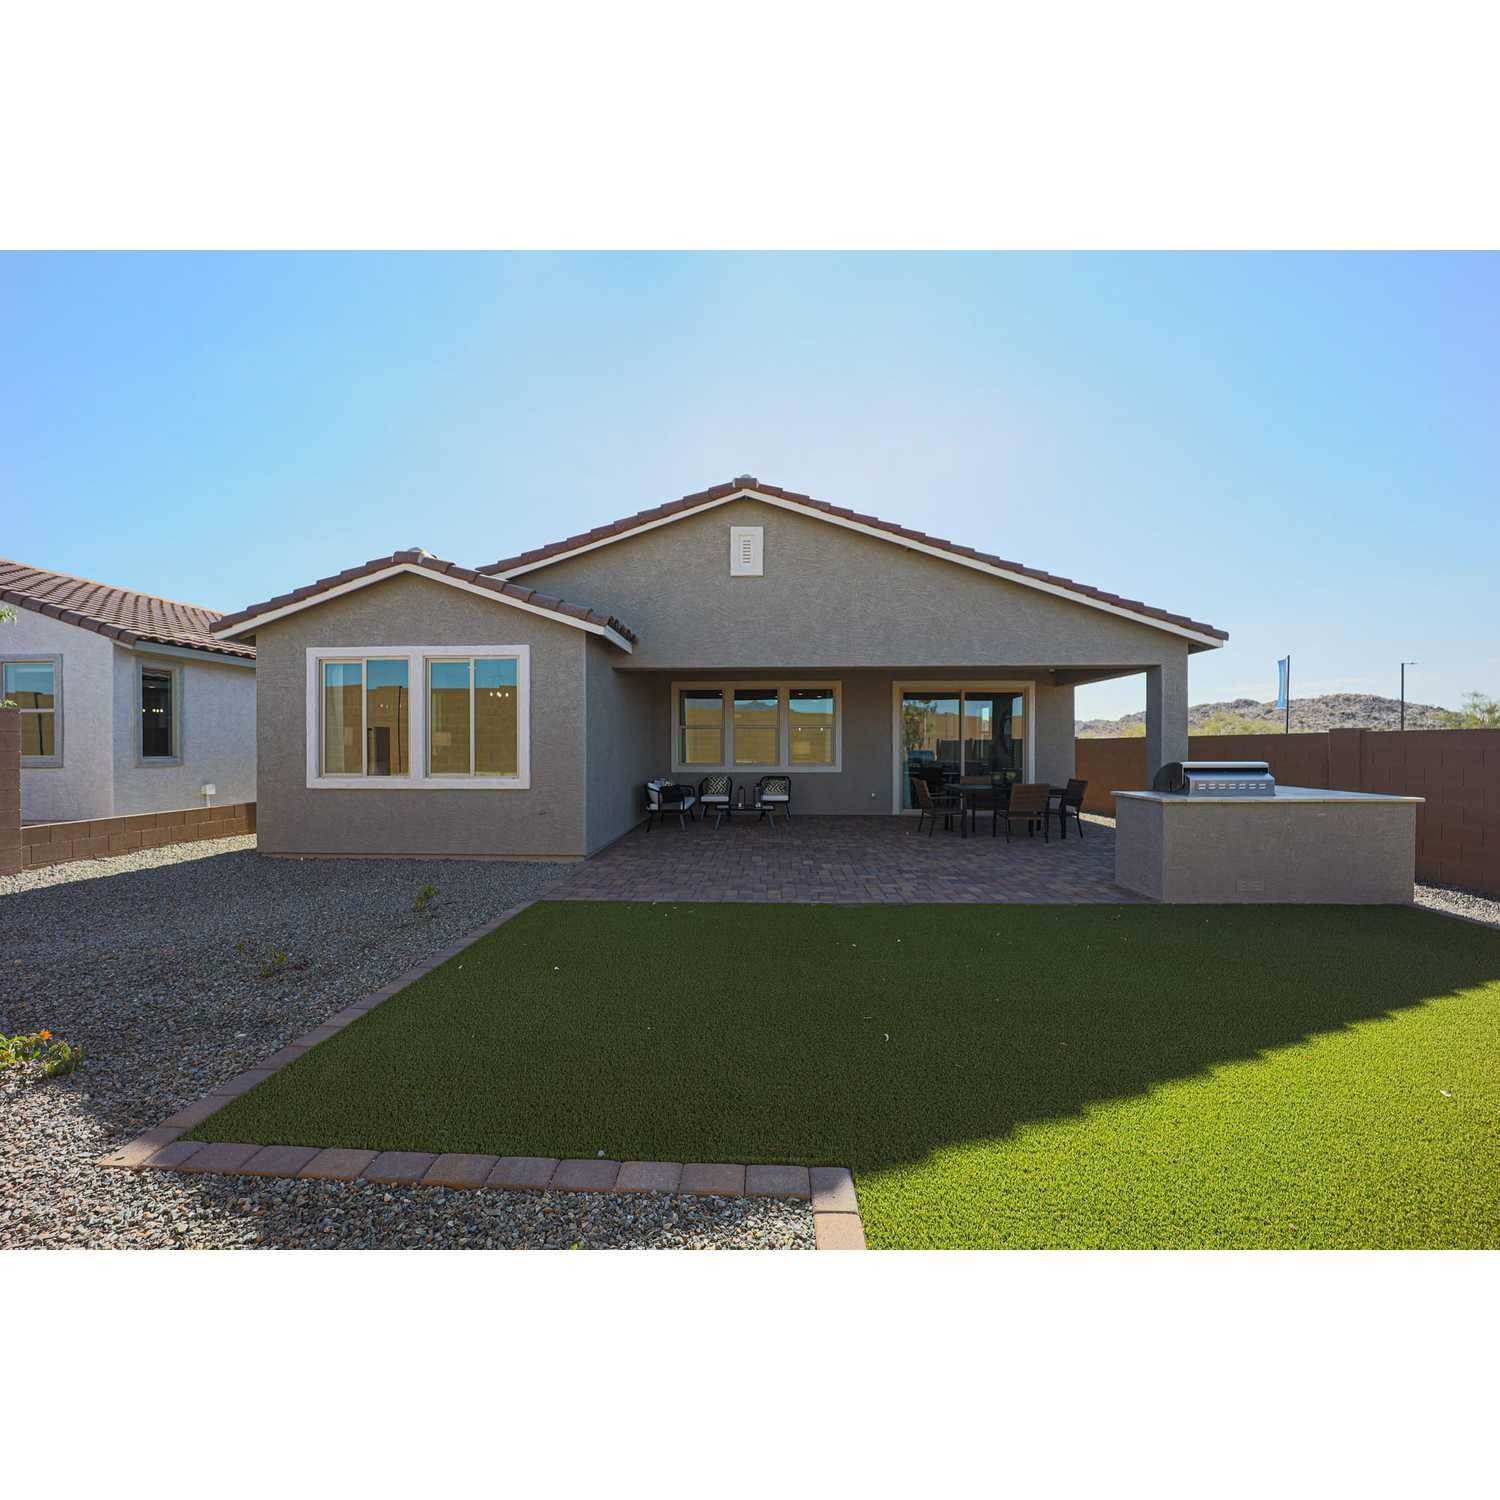 5. Single Family for Sale at Goodyear, AZ 85338